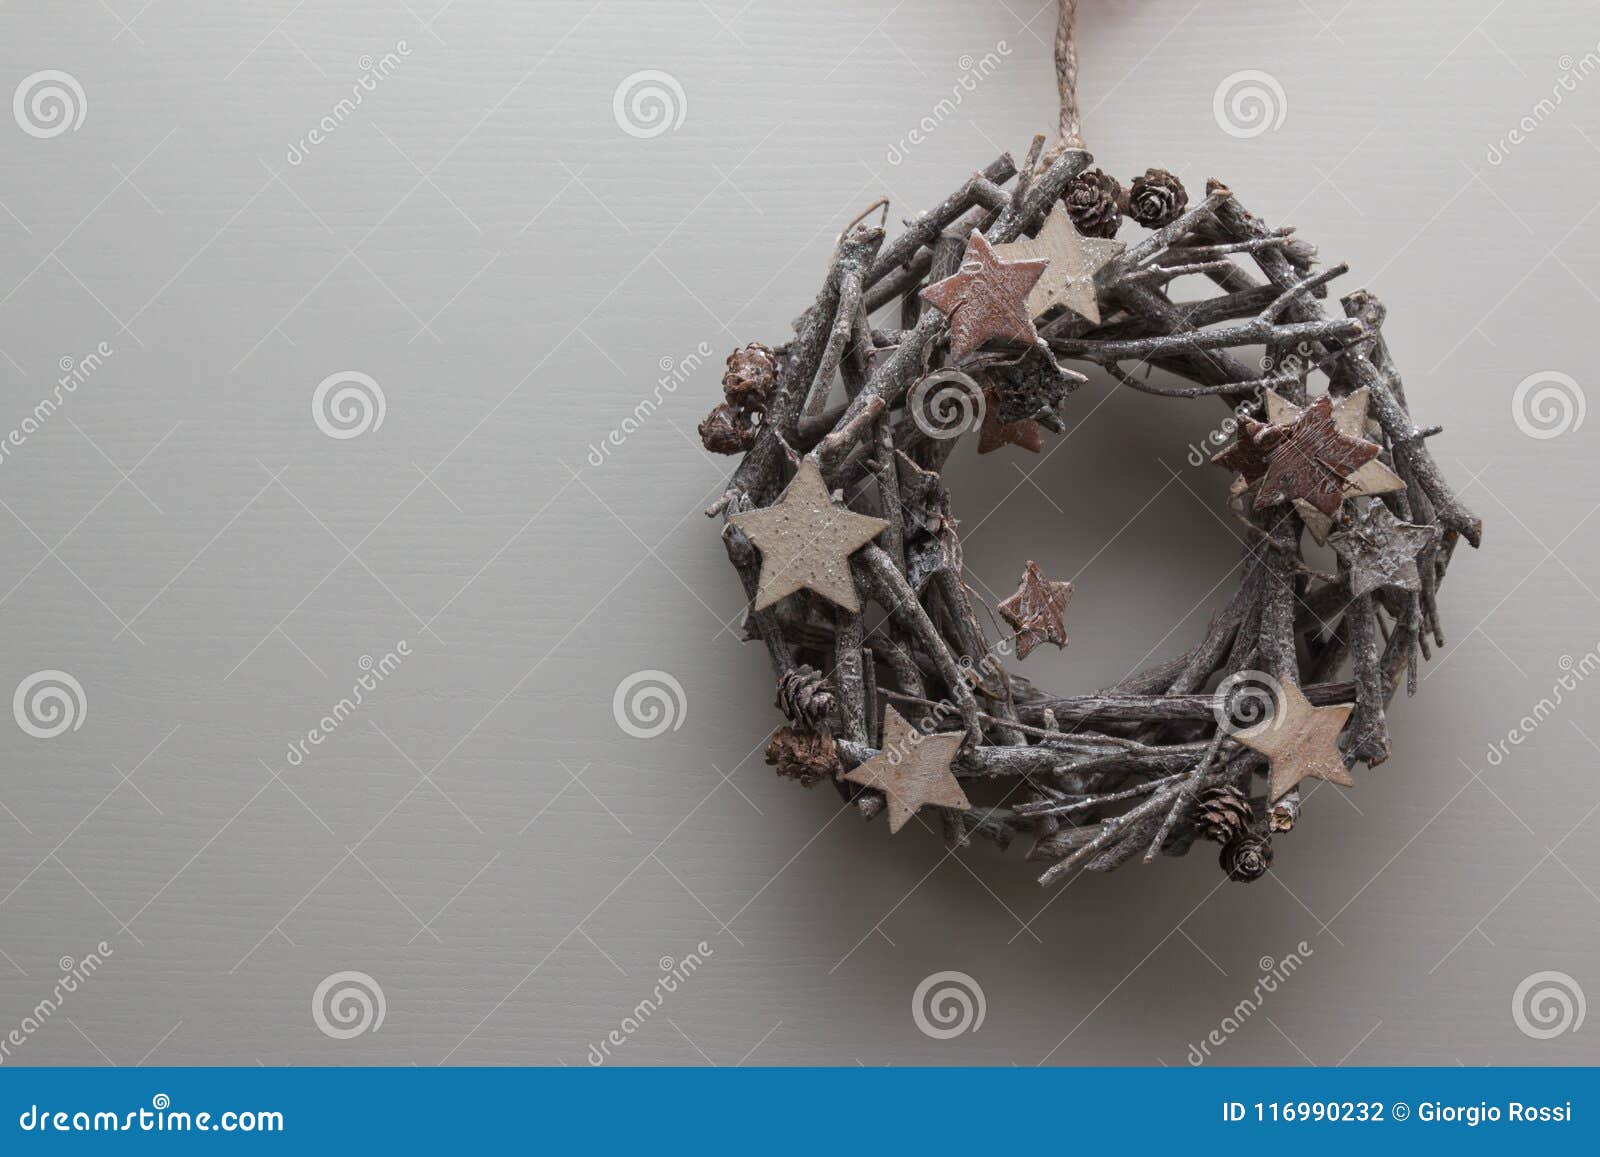 Circular Branches Woven: Christmas Decoration With Wooden Star And A Circular Decoration Of Branches For Christmas